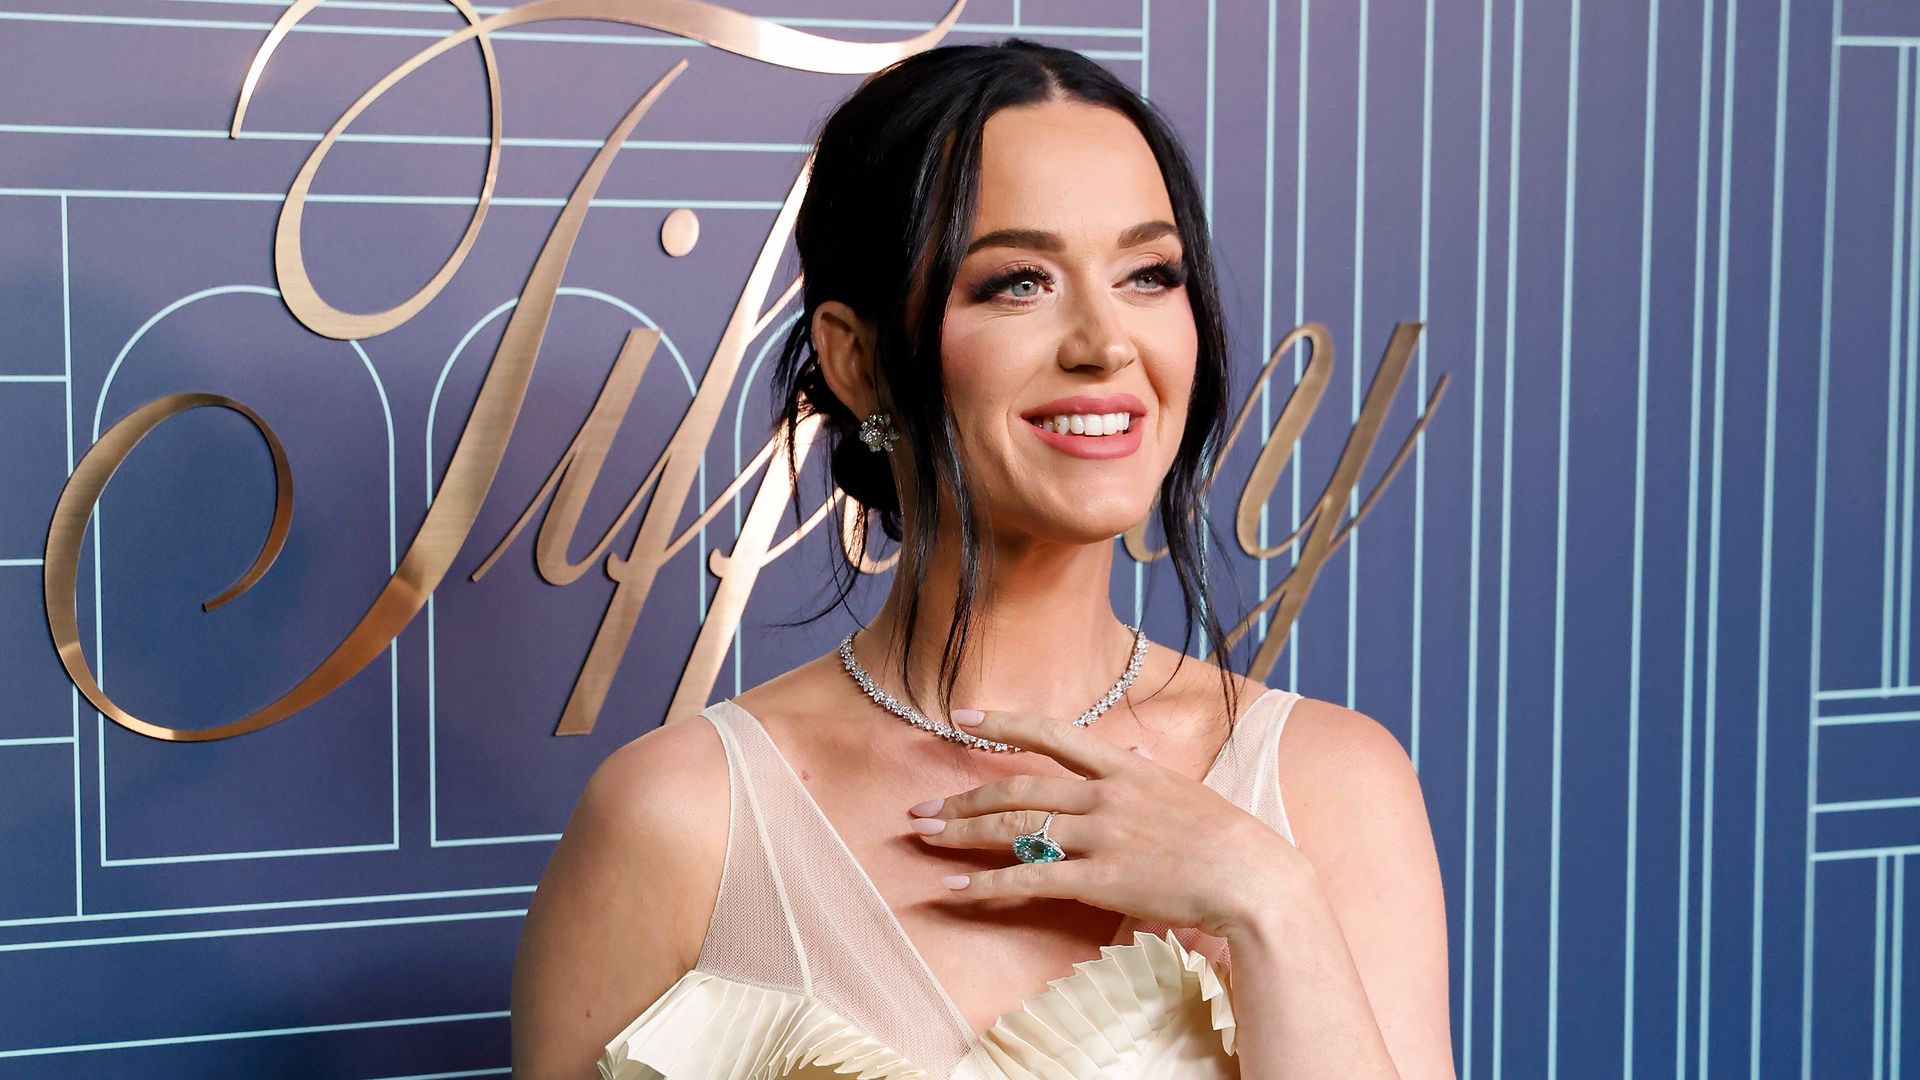 Katy Perry smiling and looking to the left